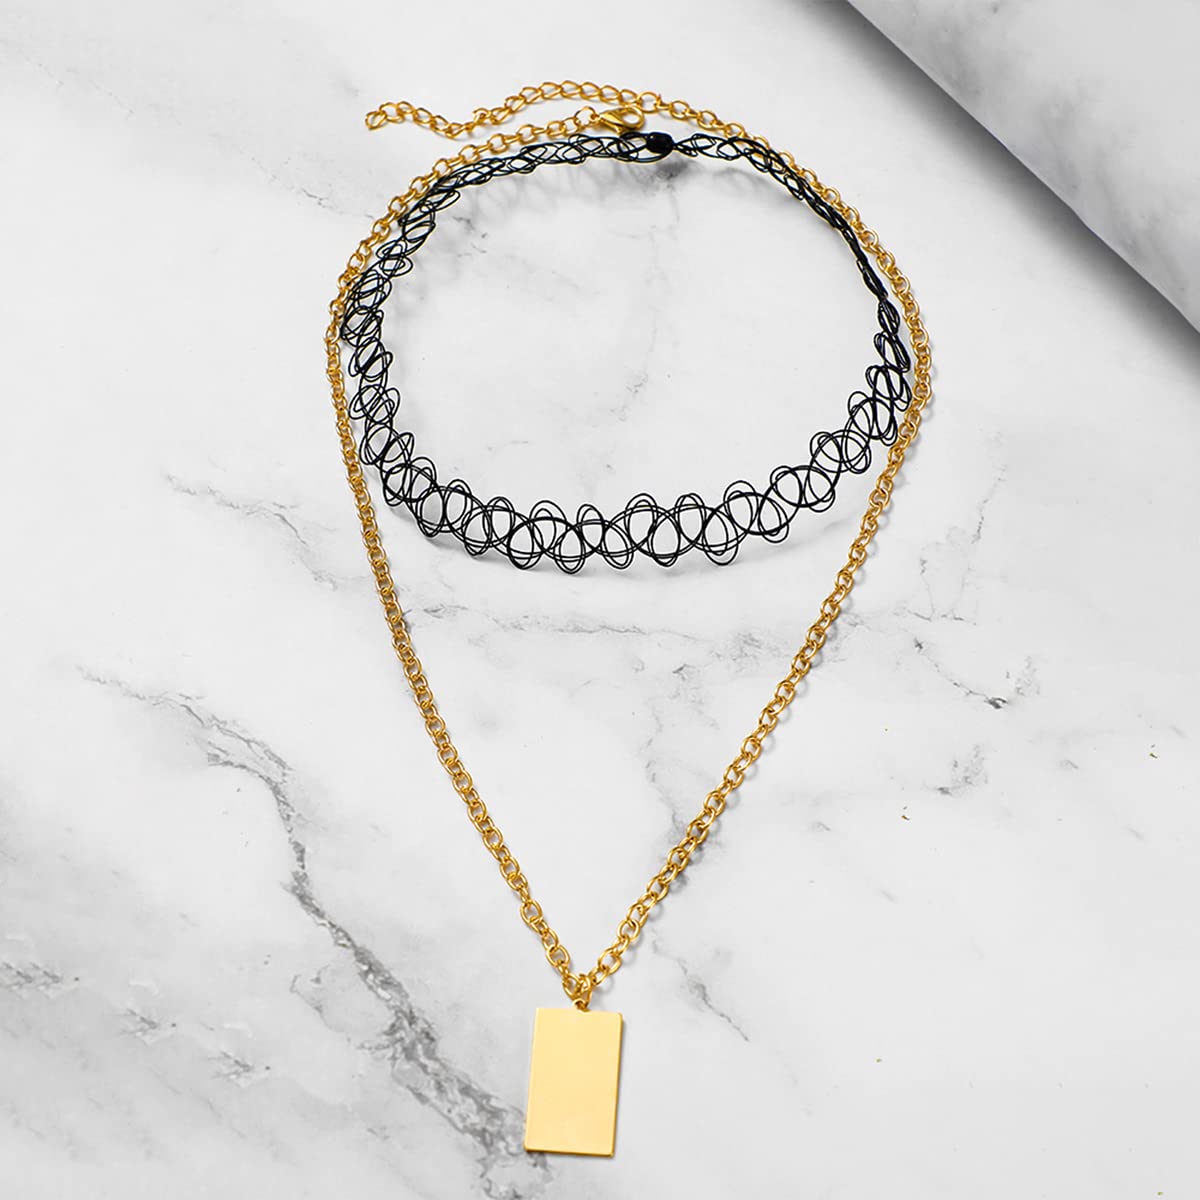 Yellow Chimes Necklace For Women Black Spiraled Choker necklace With Long Gold Tone Chain Rectangular Charm Hanging Necklace For Women and Girls